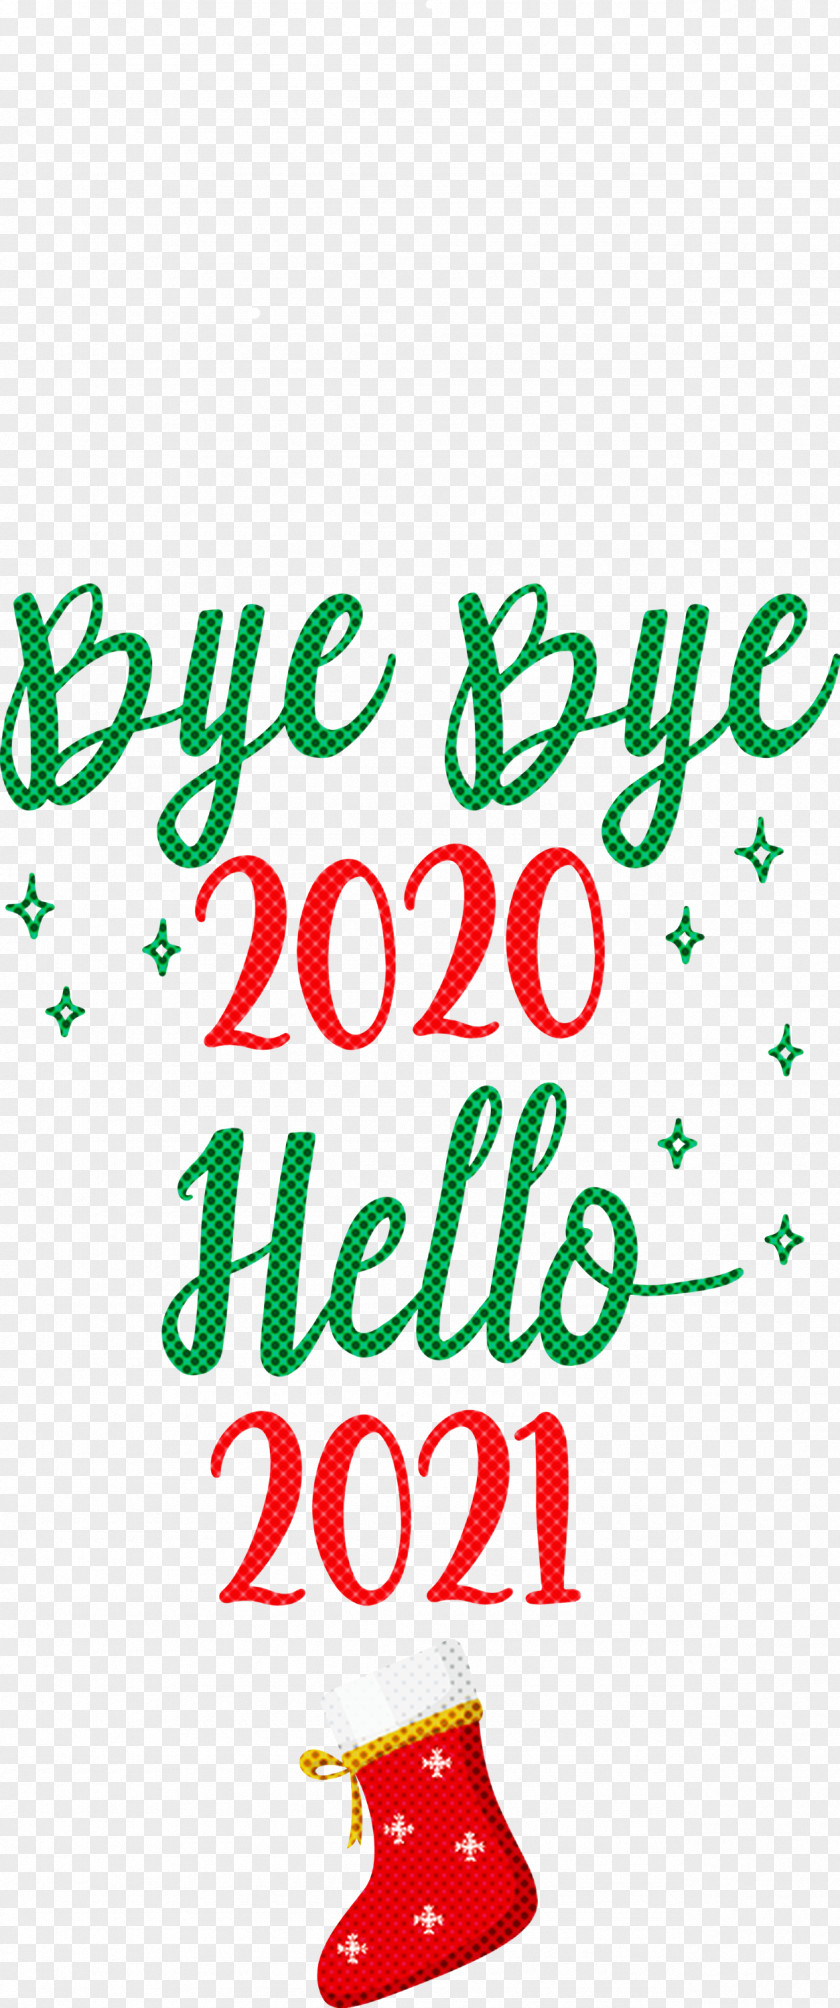 Hello 2021 Year Bye 2020 PNG